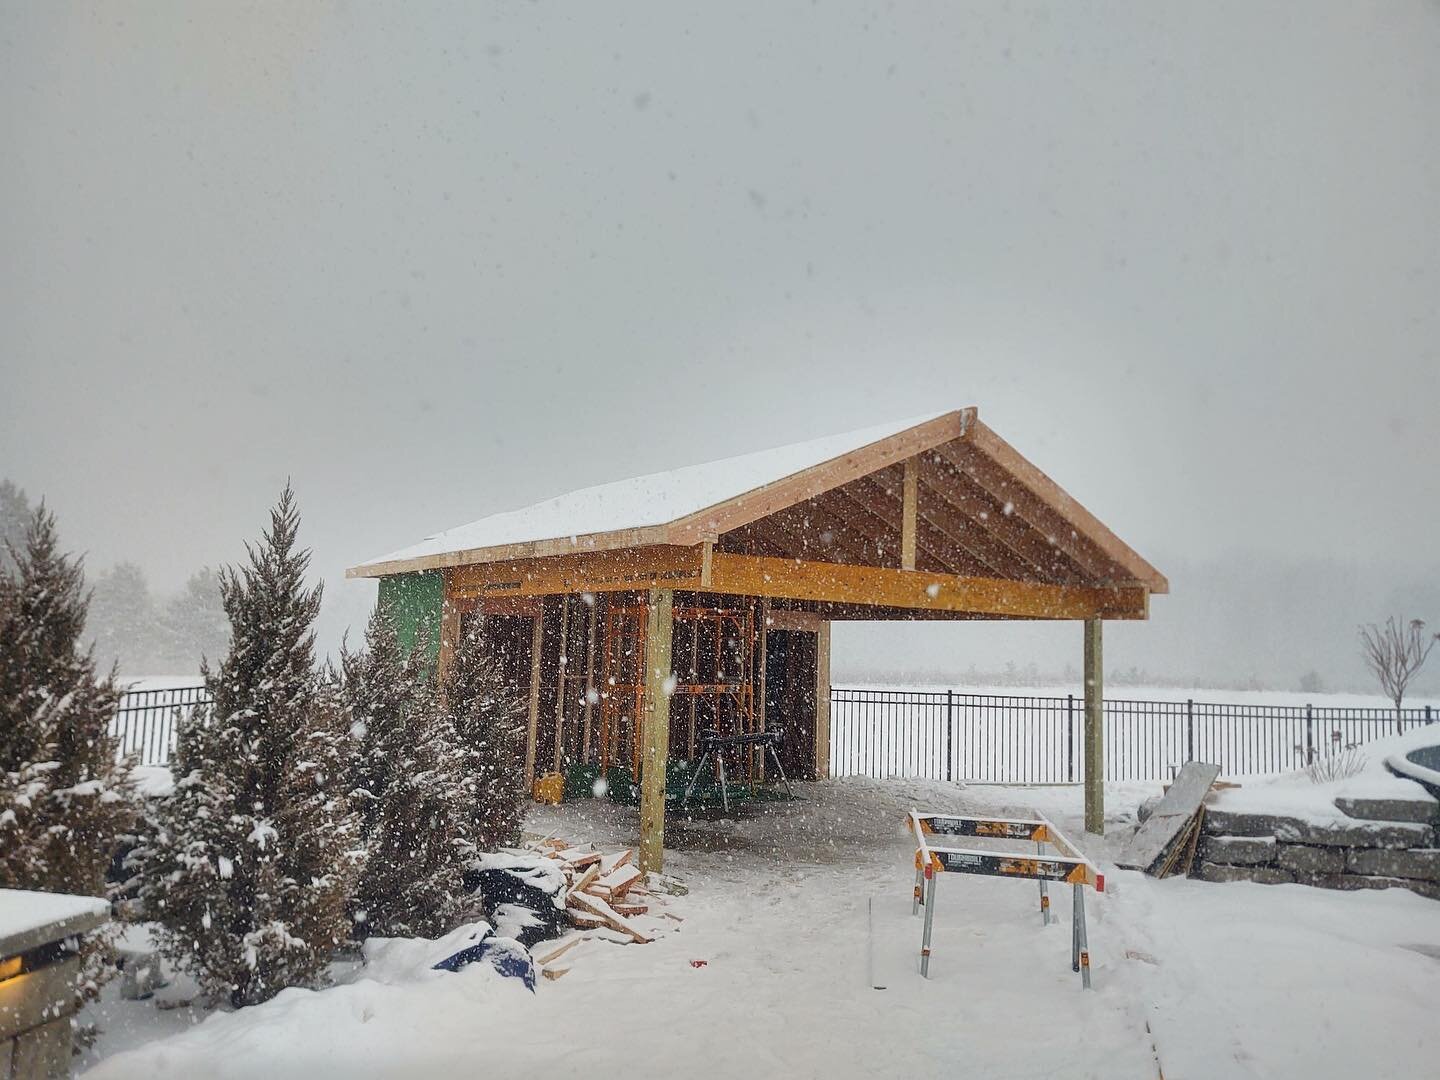 Our crew in Clay is kicking butt framing this structure in a winter wonderland.  We are lucky to have such a hard working crew!